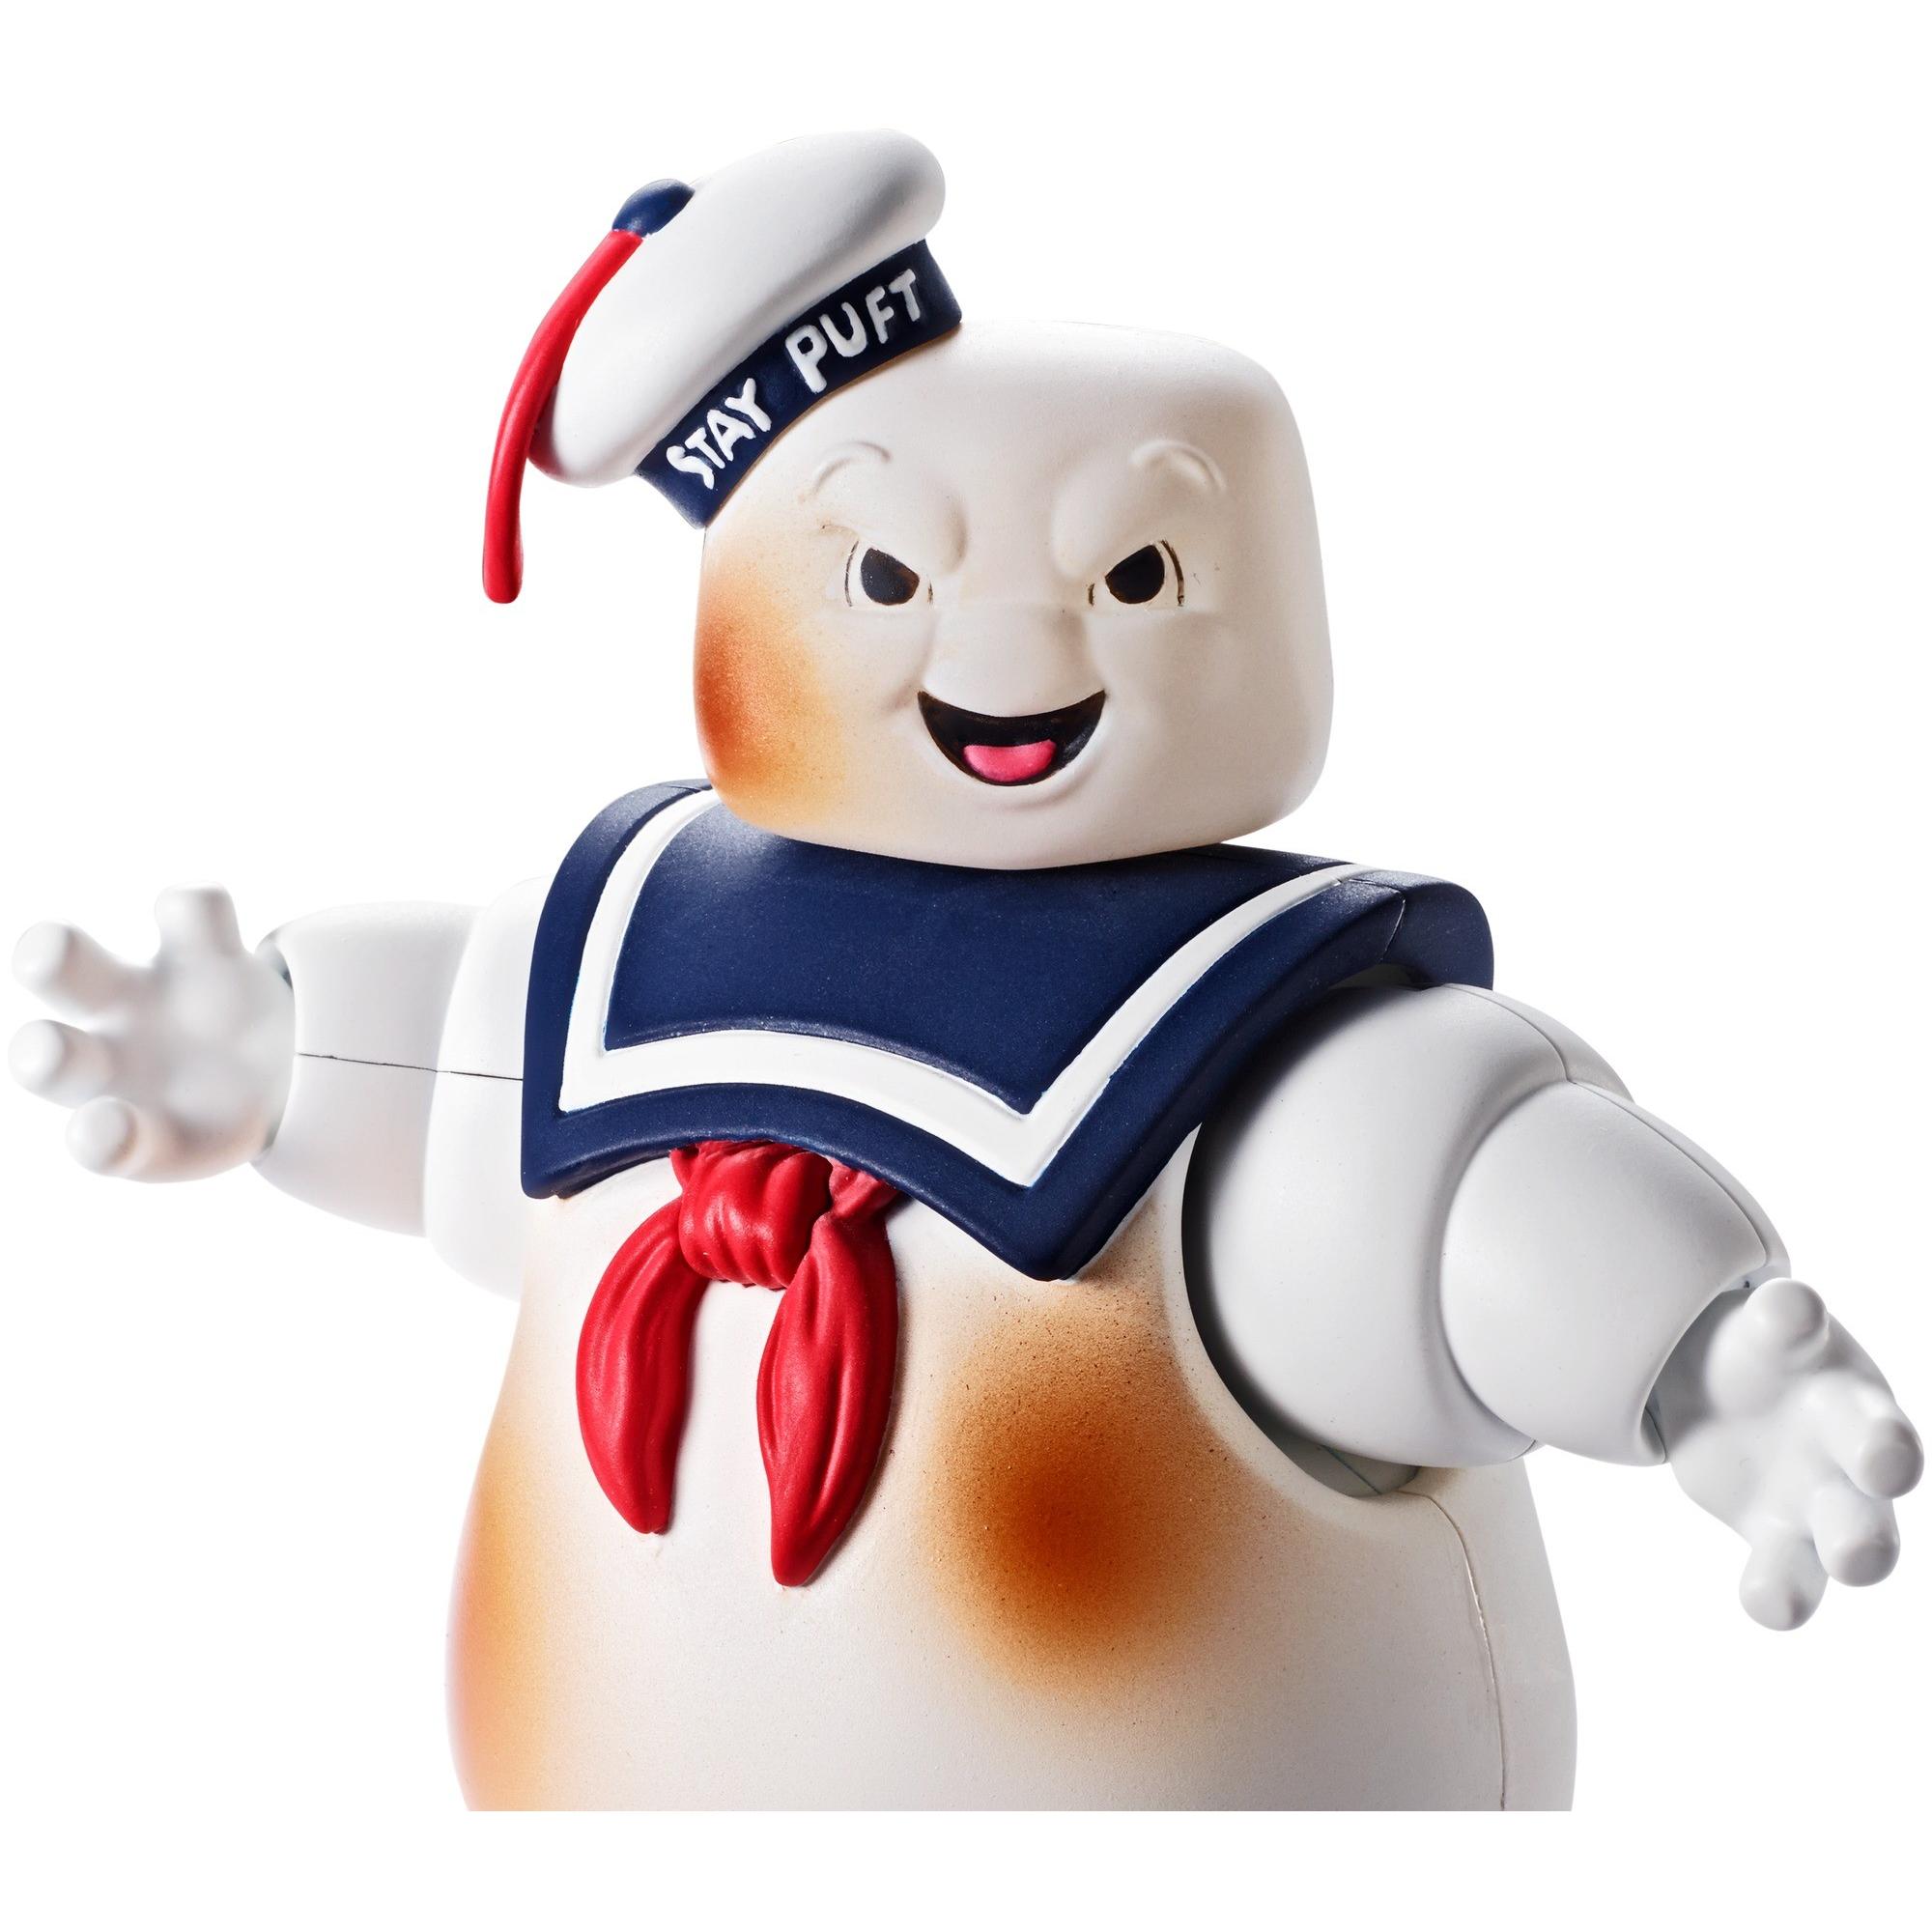 Ghostbusters 6" Stay Puft Exclusive Figure - image 2 of 3